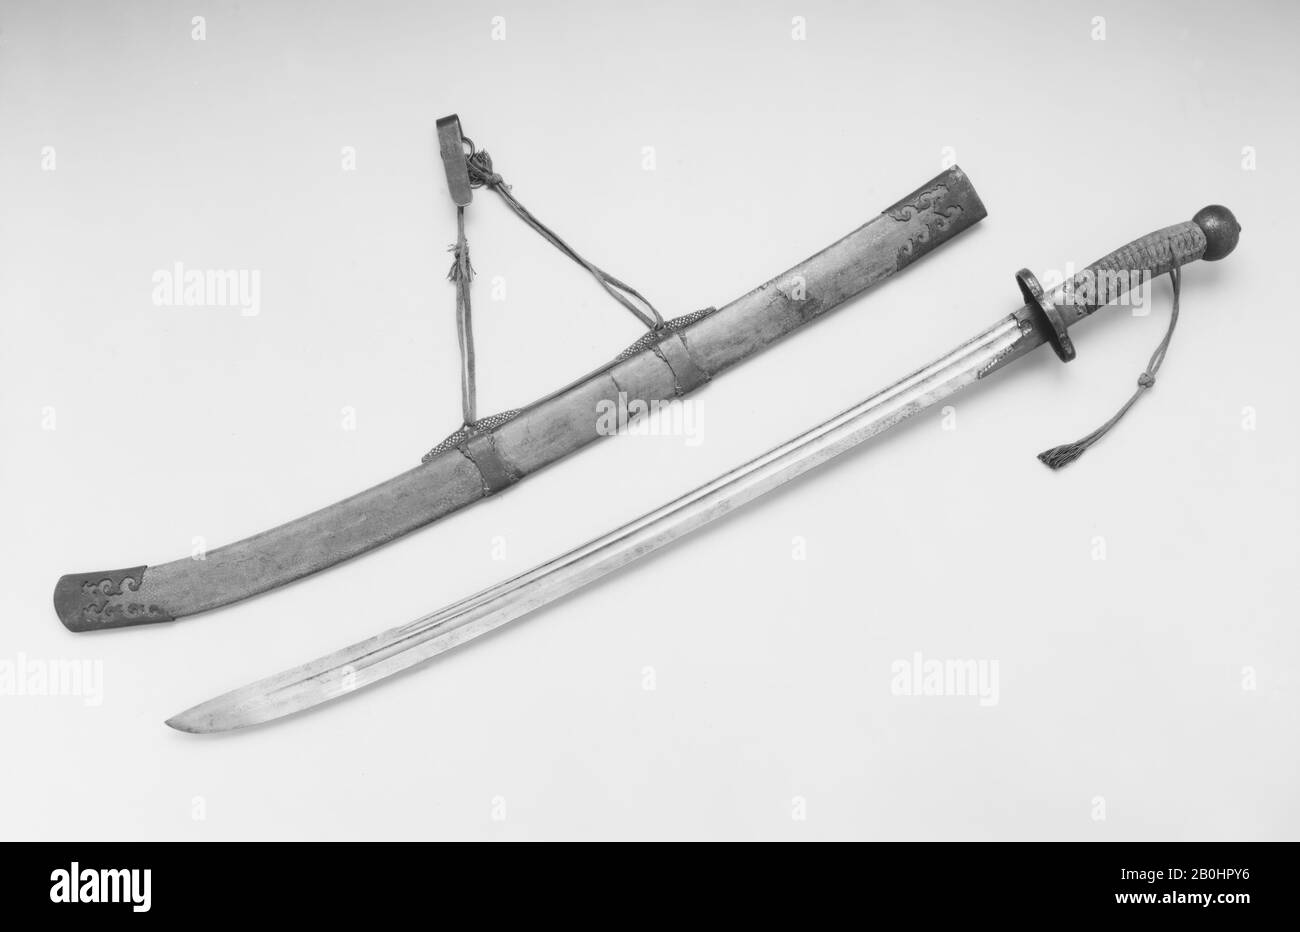 Sword with Scabbard and Belt Hook, Chinese, 18th century, Chinese, Steel, gold, brass, shark skin, wood, textile, H. with scabbard 39 1/2 in. (100.3 cm); H. without scabbard 38 in. (96.5 cm); H. of blade 31 3/4 in. (80.7 cm); W. 3 1/2 in. (8.9 cm); Wt. 1 lb. 11.5 oz. (779.6 g); Wt. of scabbard 15.1 oz. (428.1 g), Swords Stock Photo